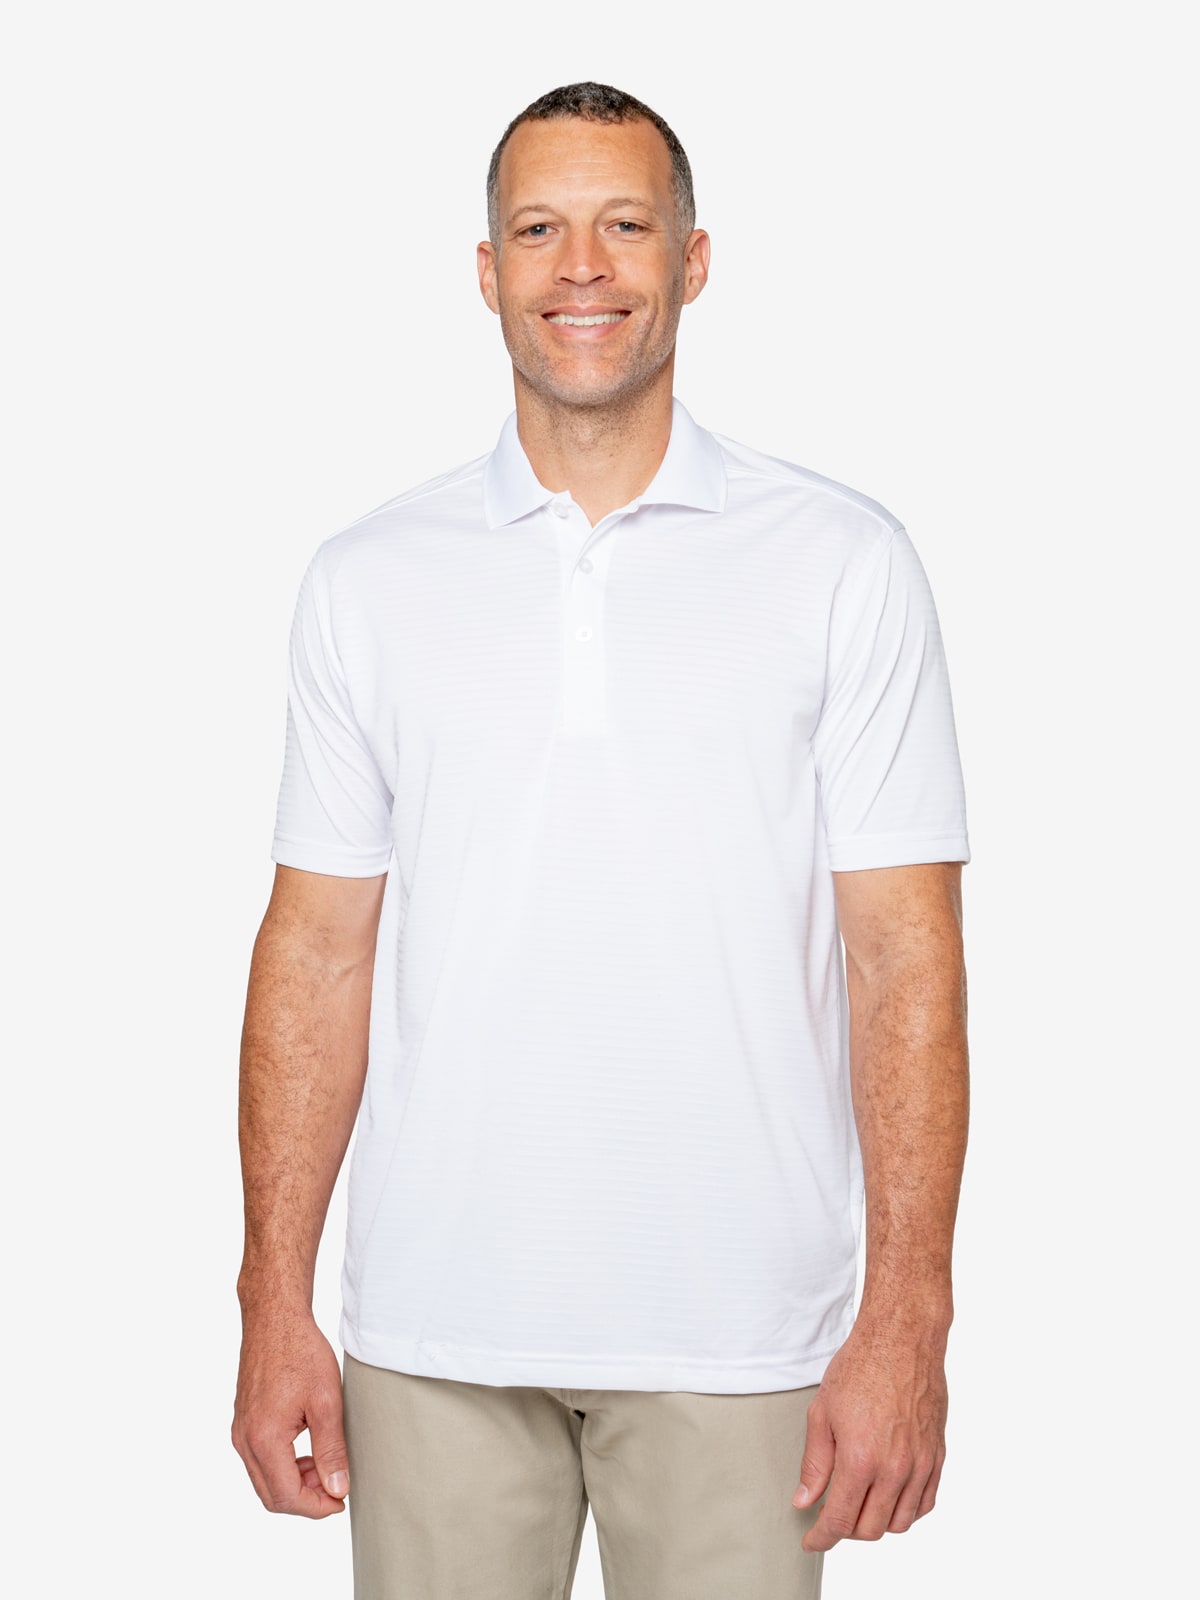 Men's Insect Shield Short Sleeve Tech Polo